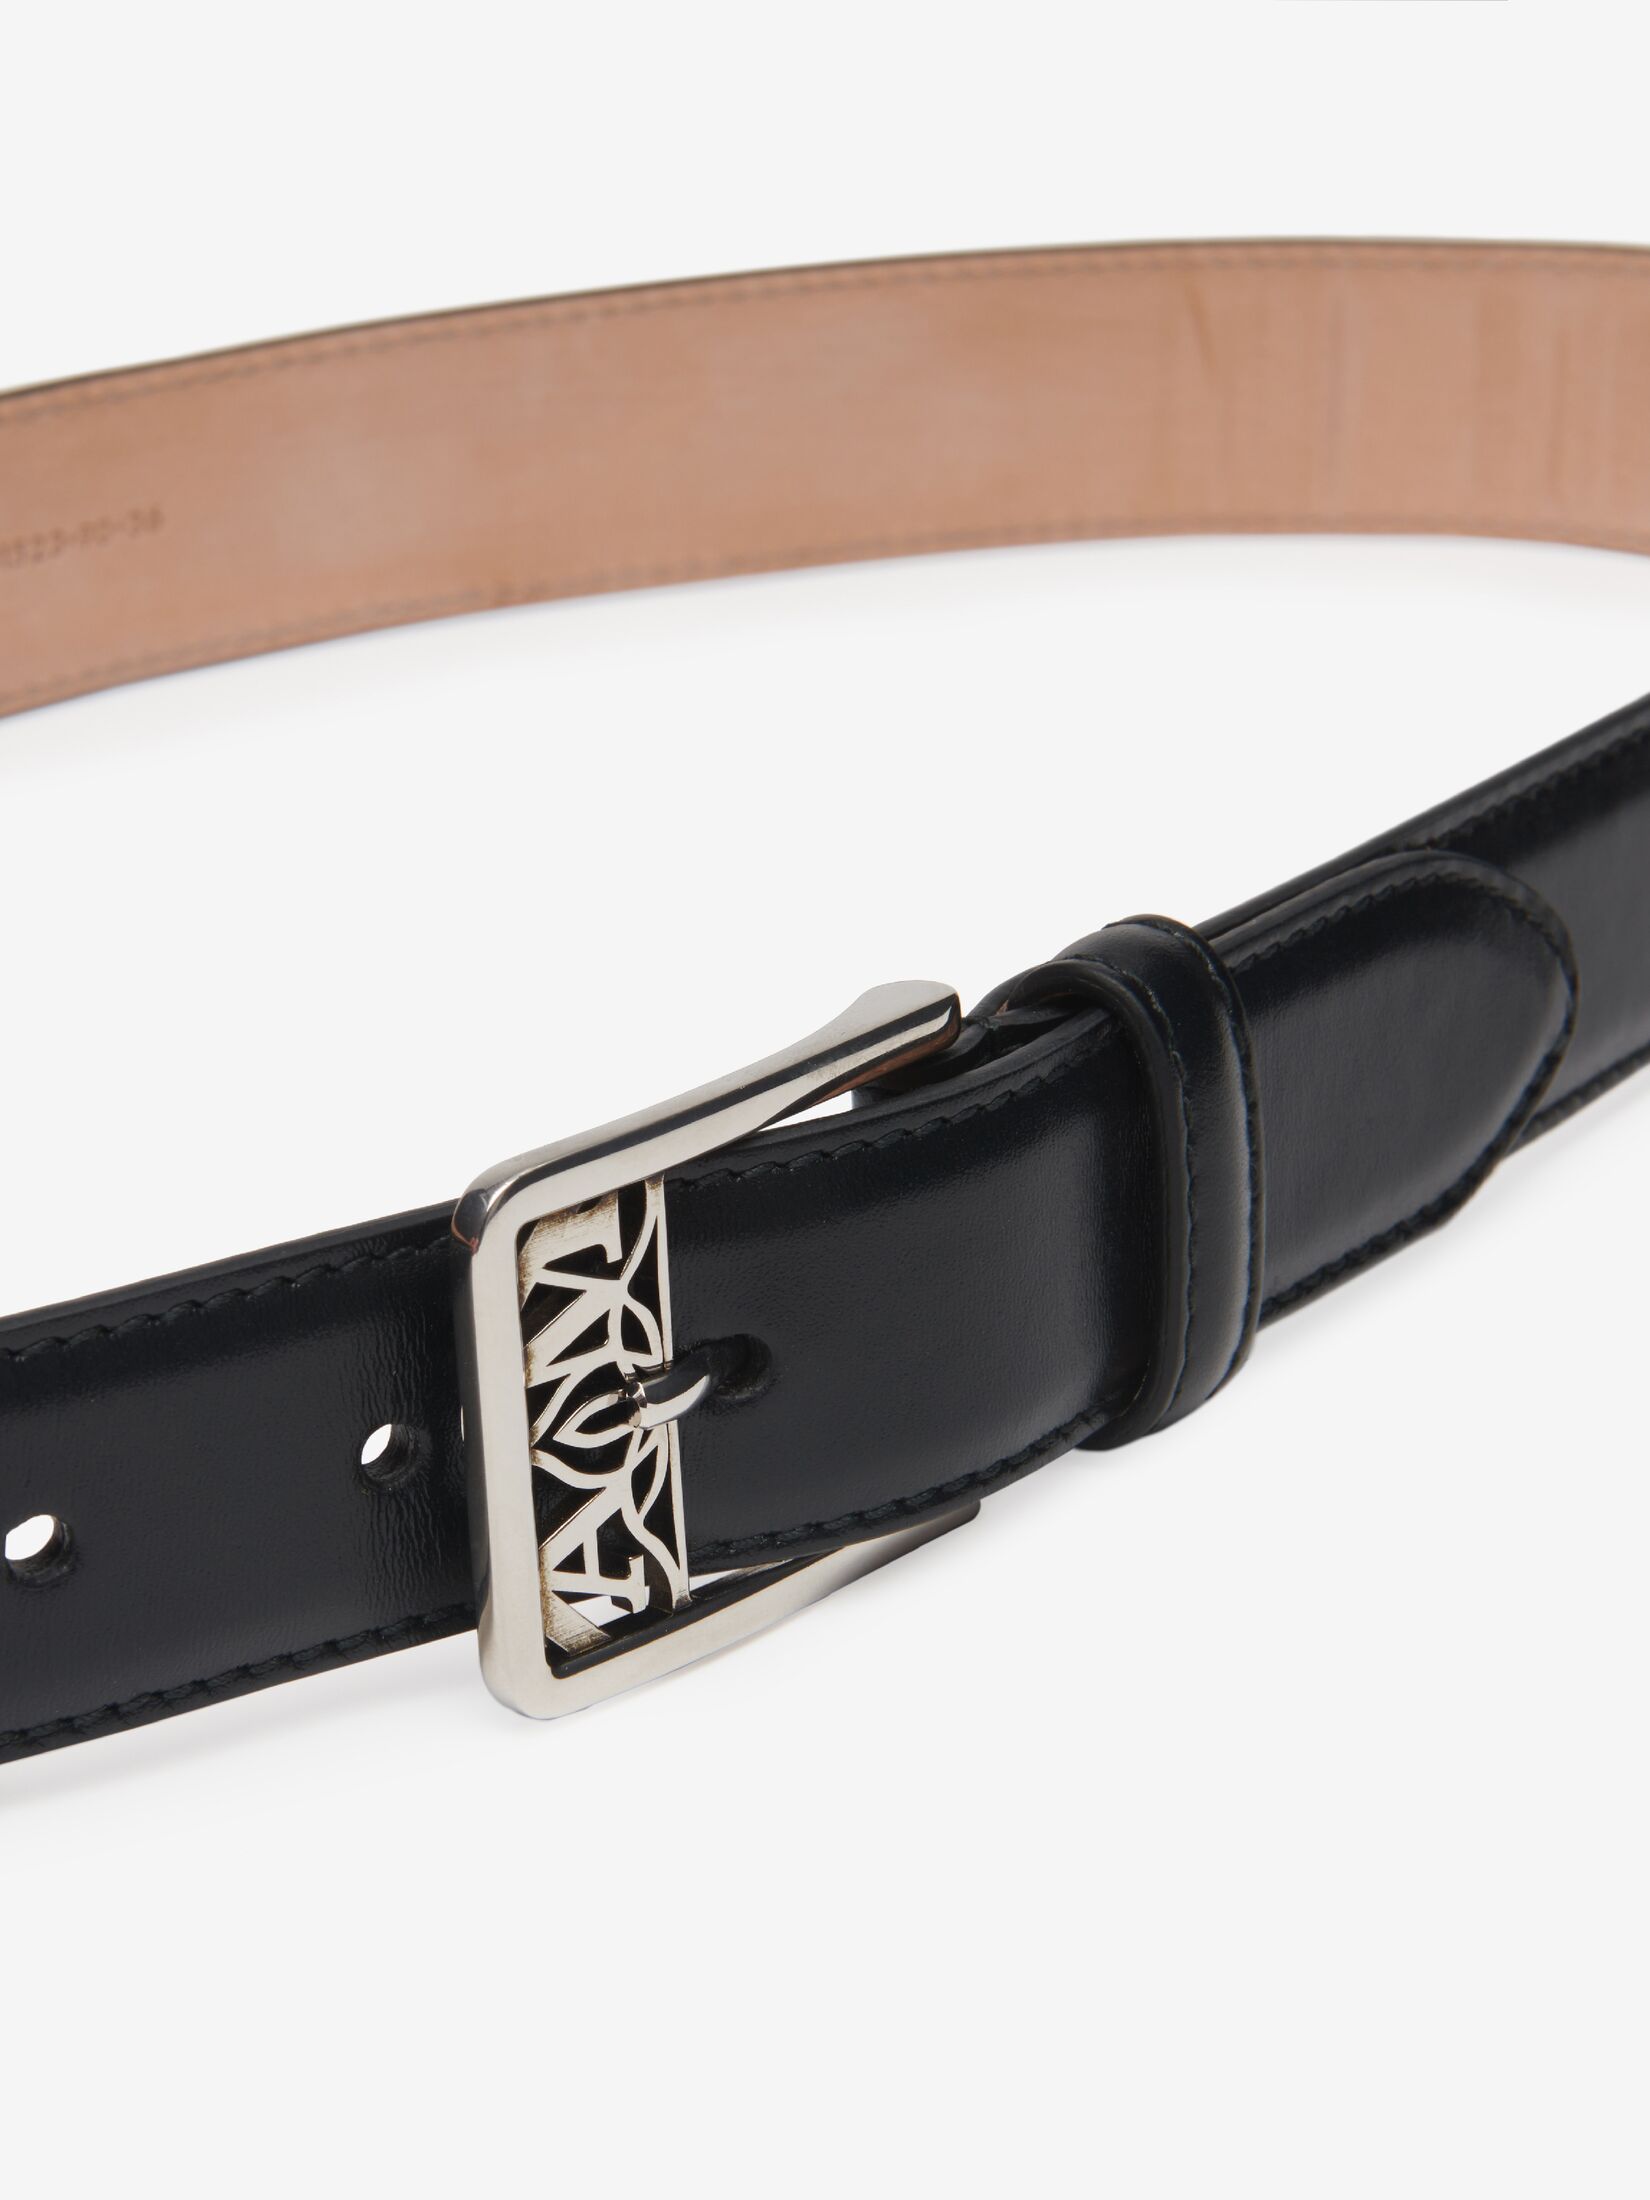 The Seal Buckle Belt